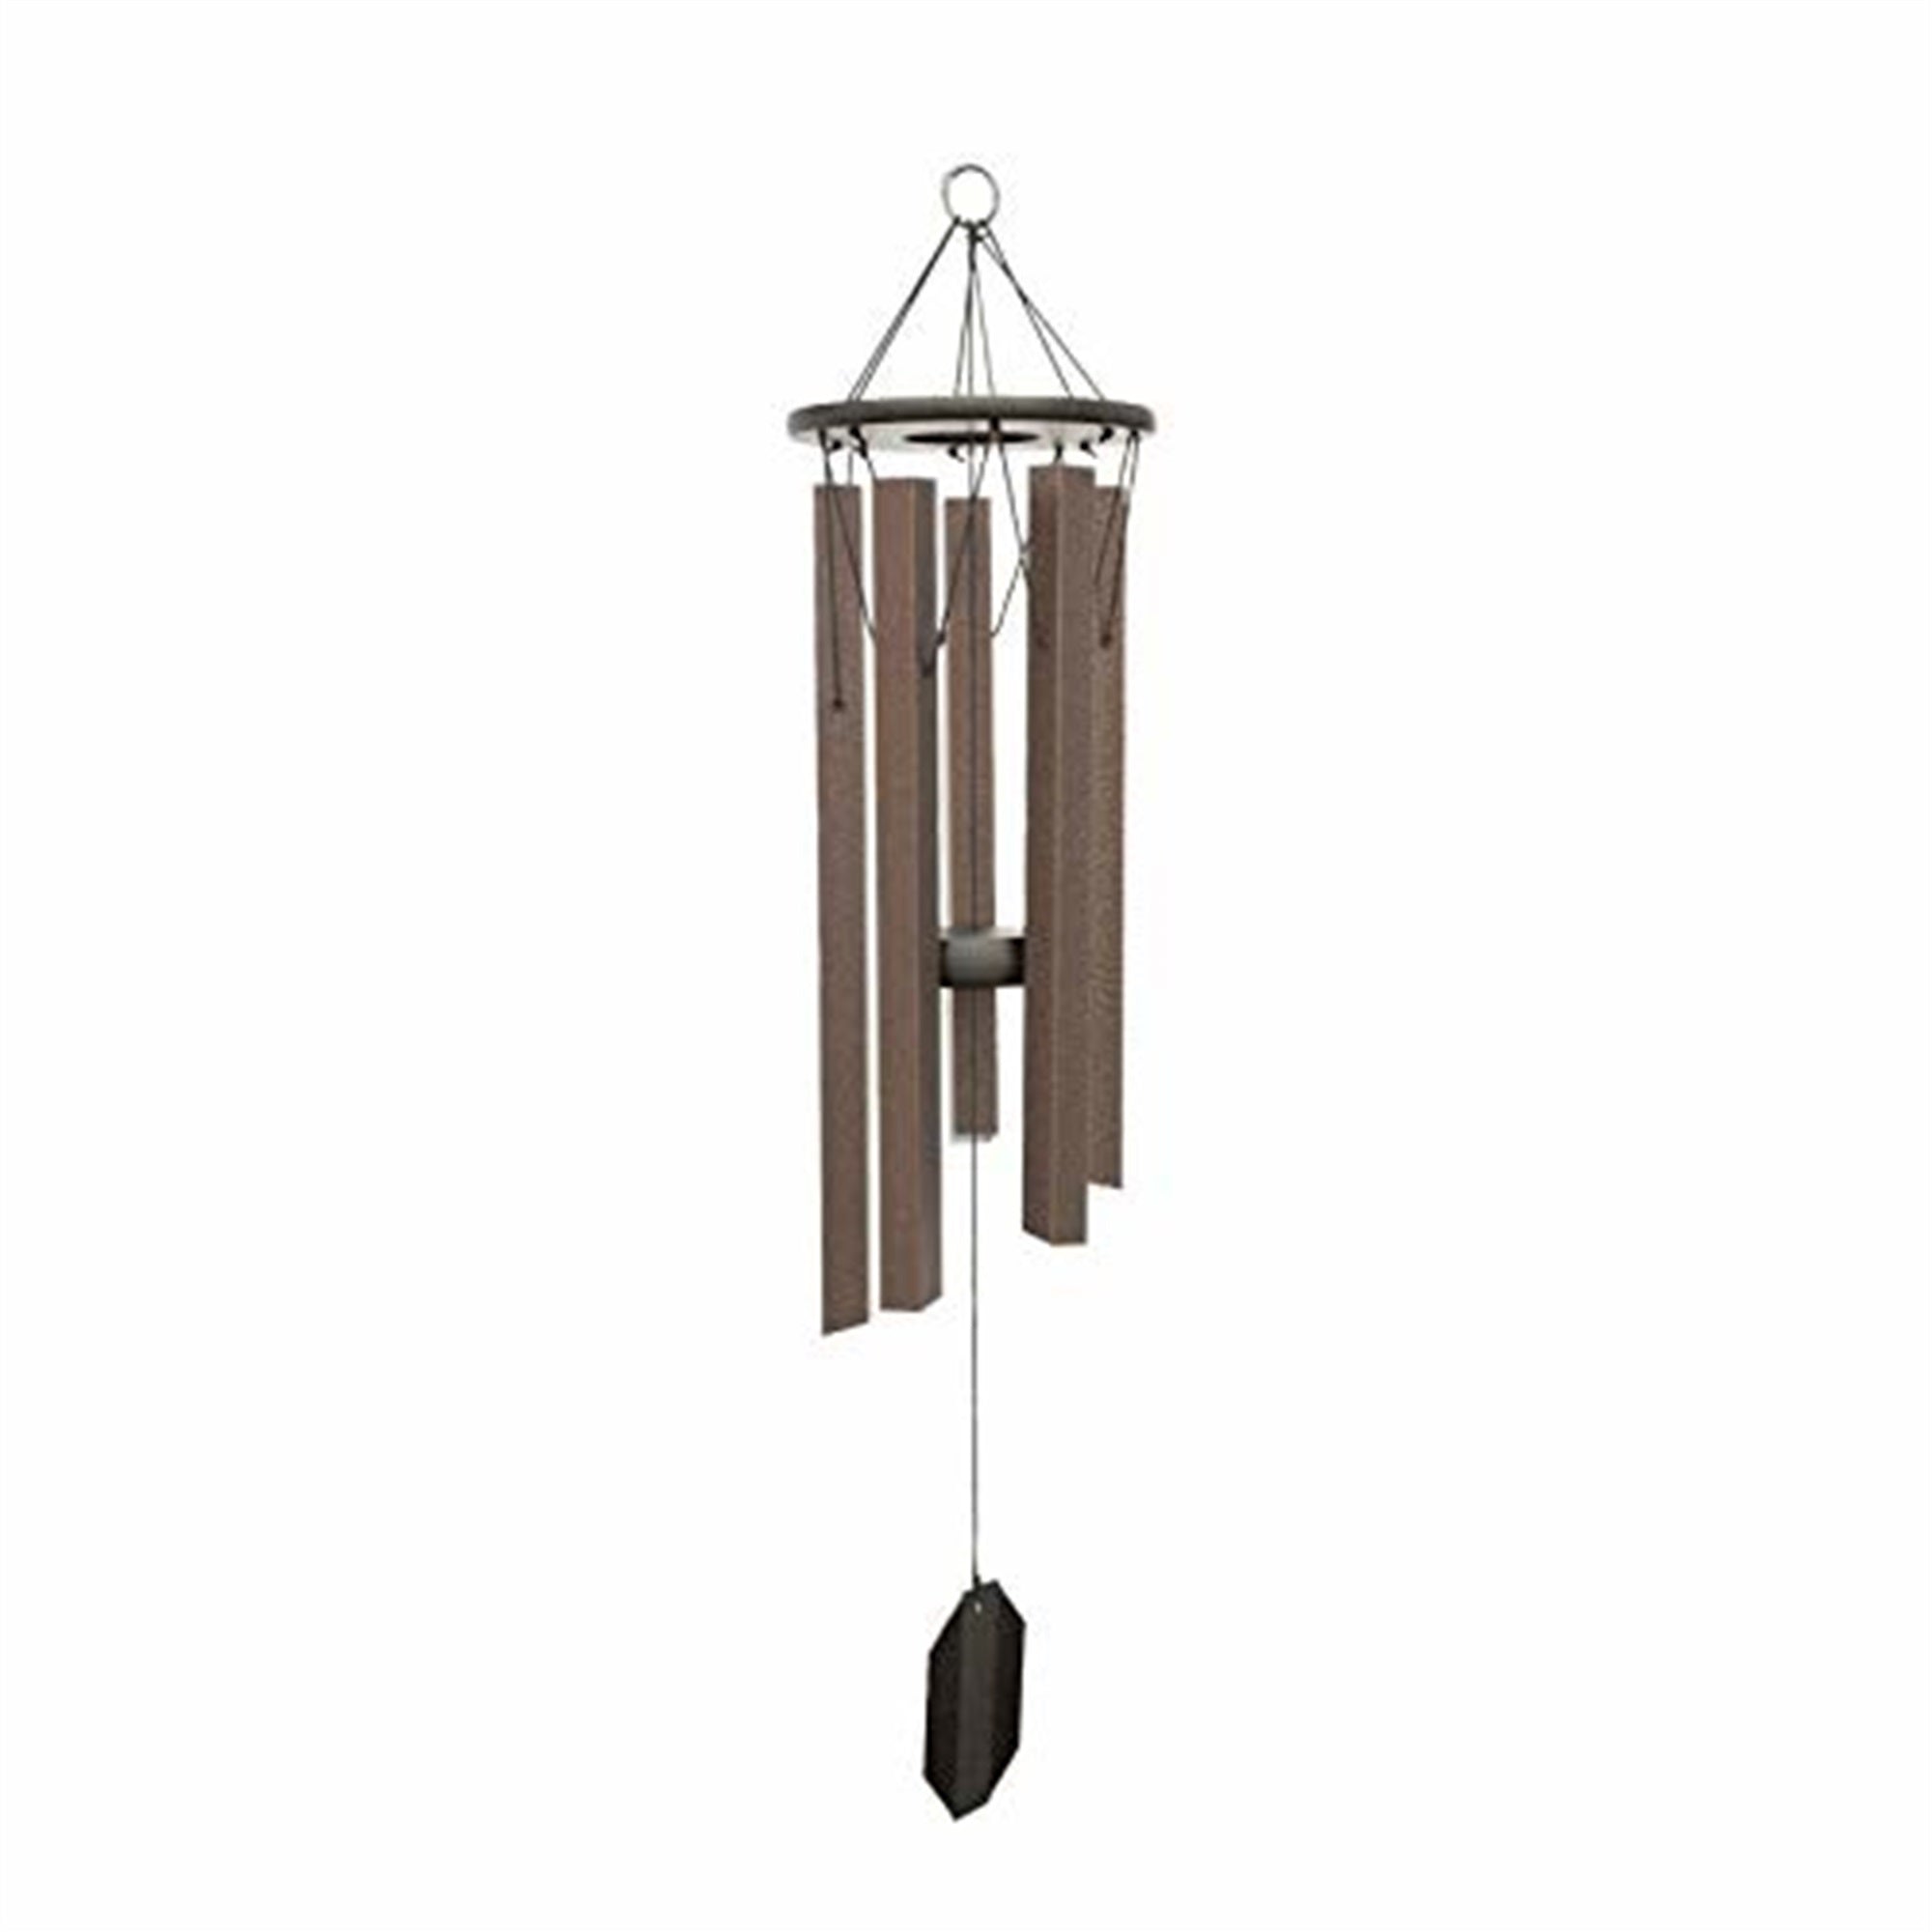 36 Ocean Breeze Wind Chime - Amish Handcrafted Country Chime